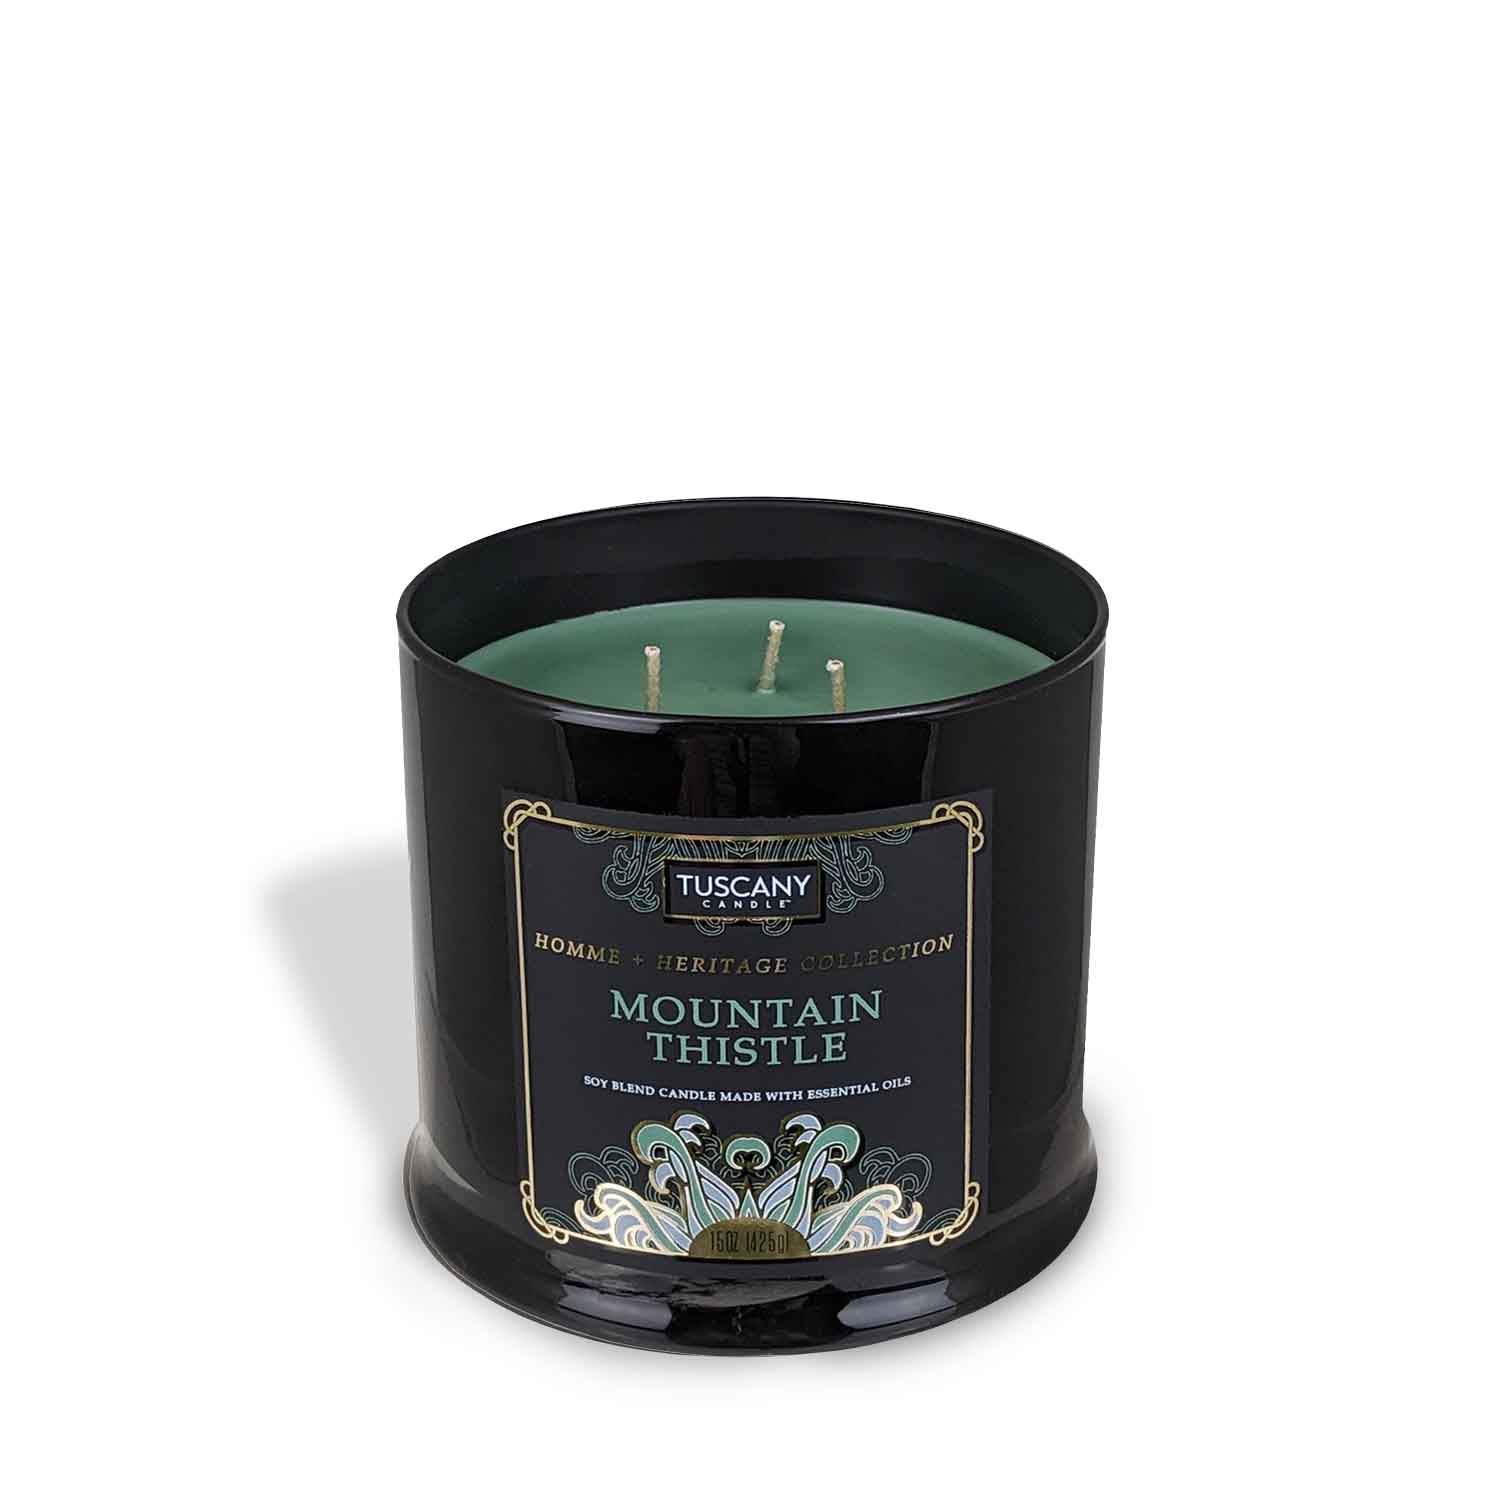 A Mountain Thistle Scented Jar Candle (15 oz) from the Homme + Heritage Collection by Tuscany Candle in a black tin with a green lid.